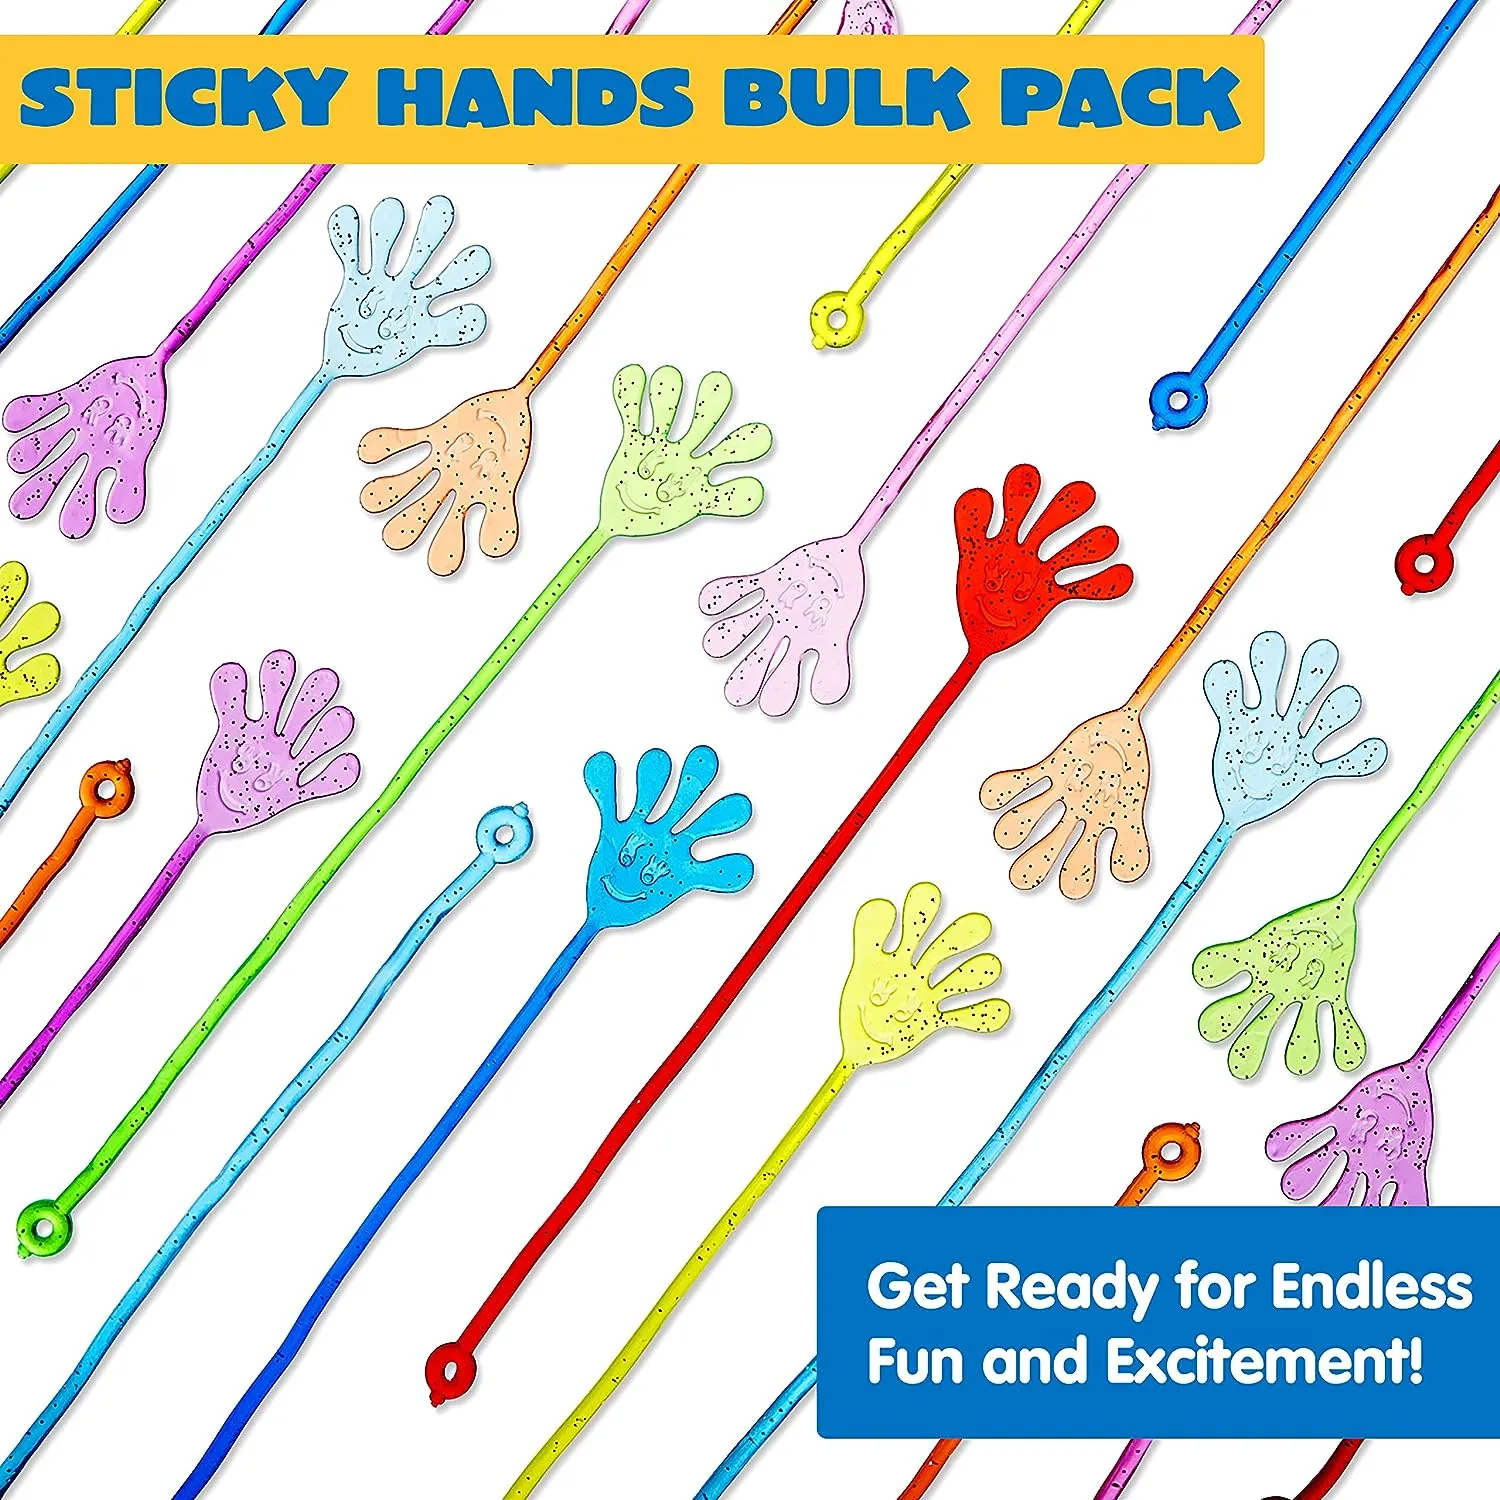 Bizzy-me 48 Sticky Hands Party Favors, Party Table Favor, Party Favor Set for Kids